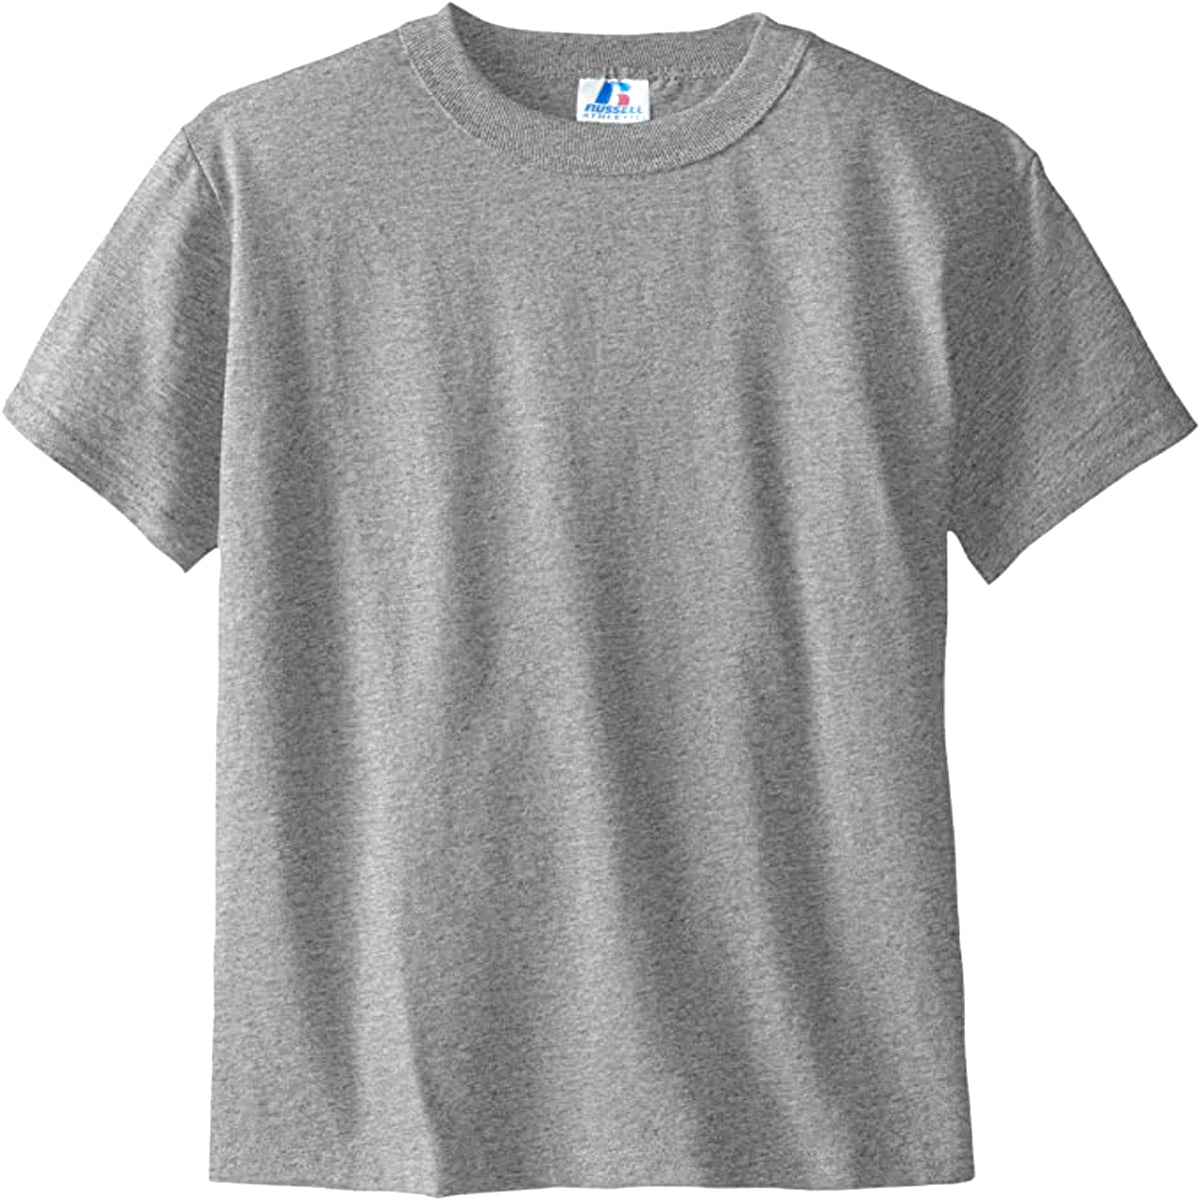 Russell Athletic Youth Short-Sleeve Cotton T-Shirt | 94030BK Apparel Russell Athletic Youth Small Oxford 